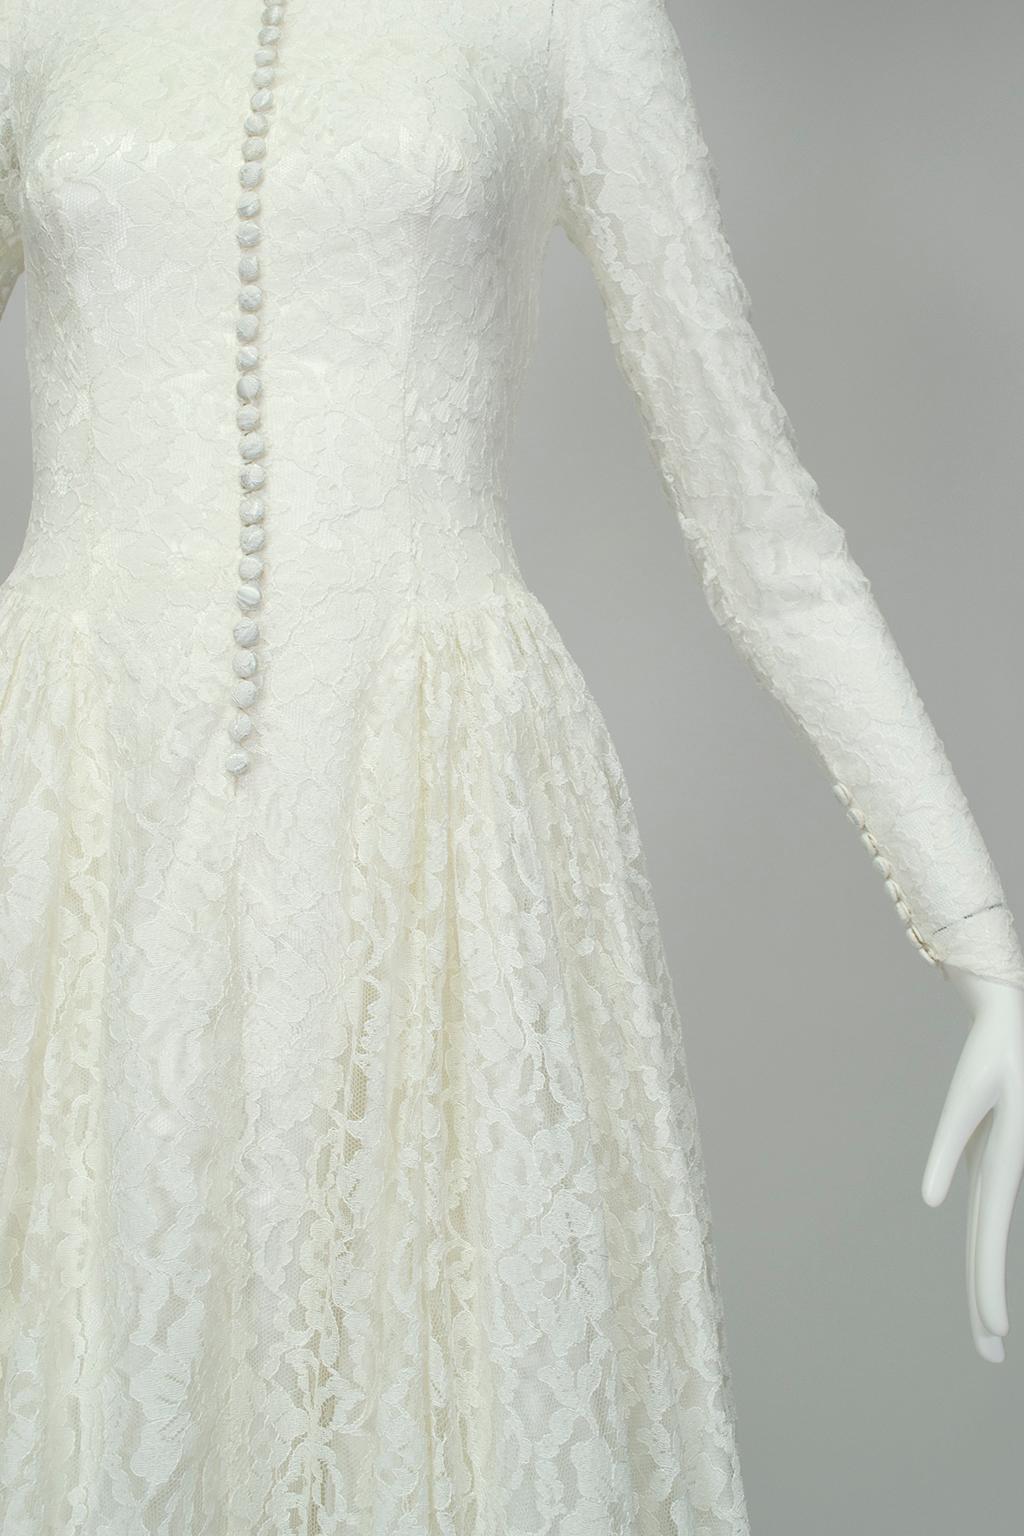 Gray Grace Kelly Inspired Ivory High-Neck Illusion Wedding Gown and Cap – XS, 1951 For Sale